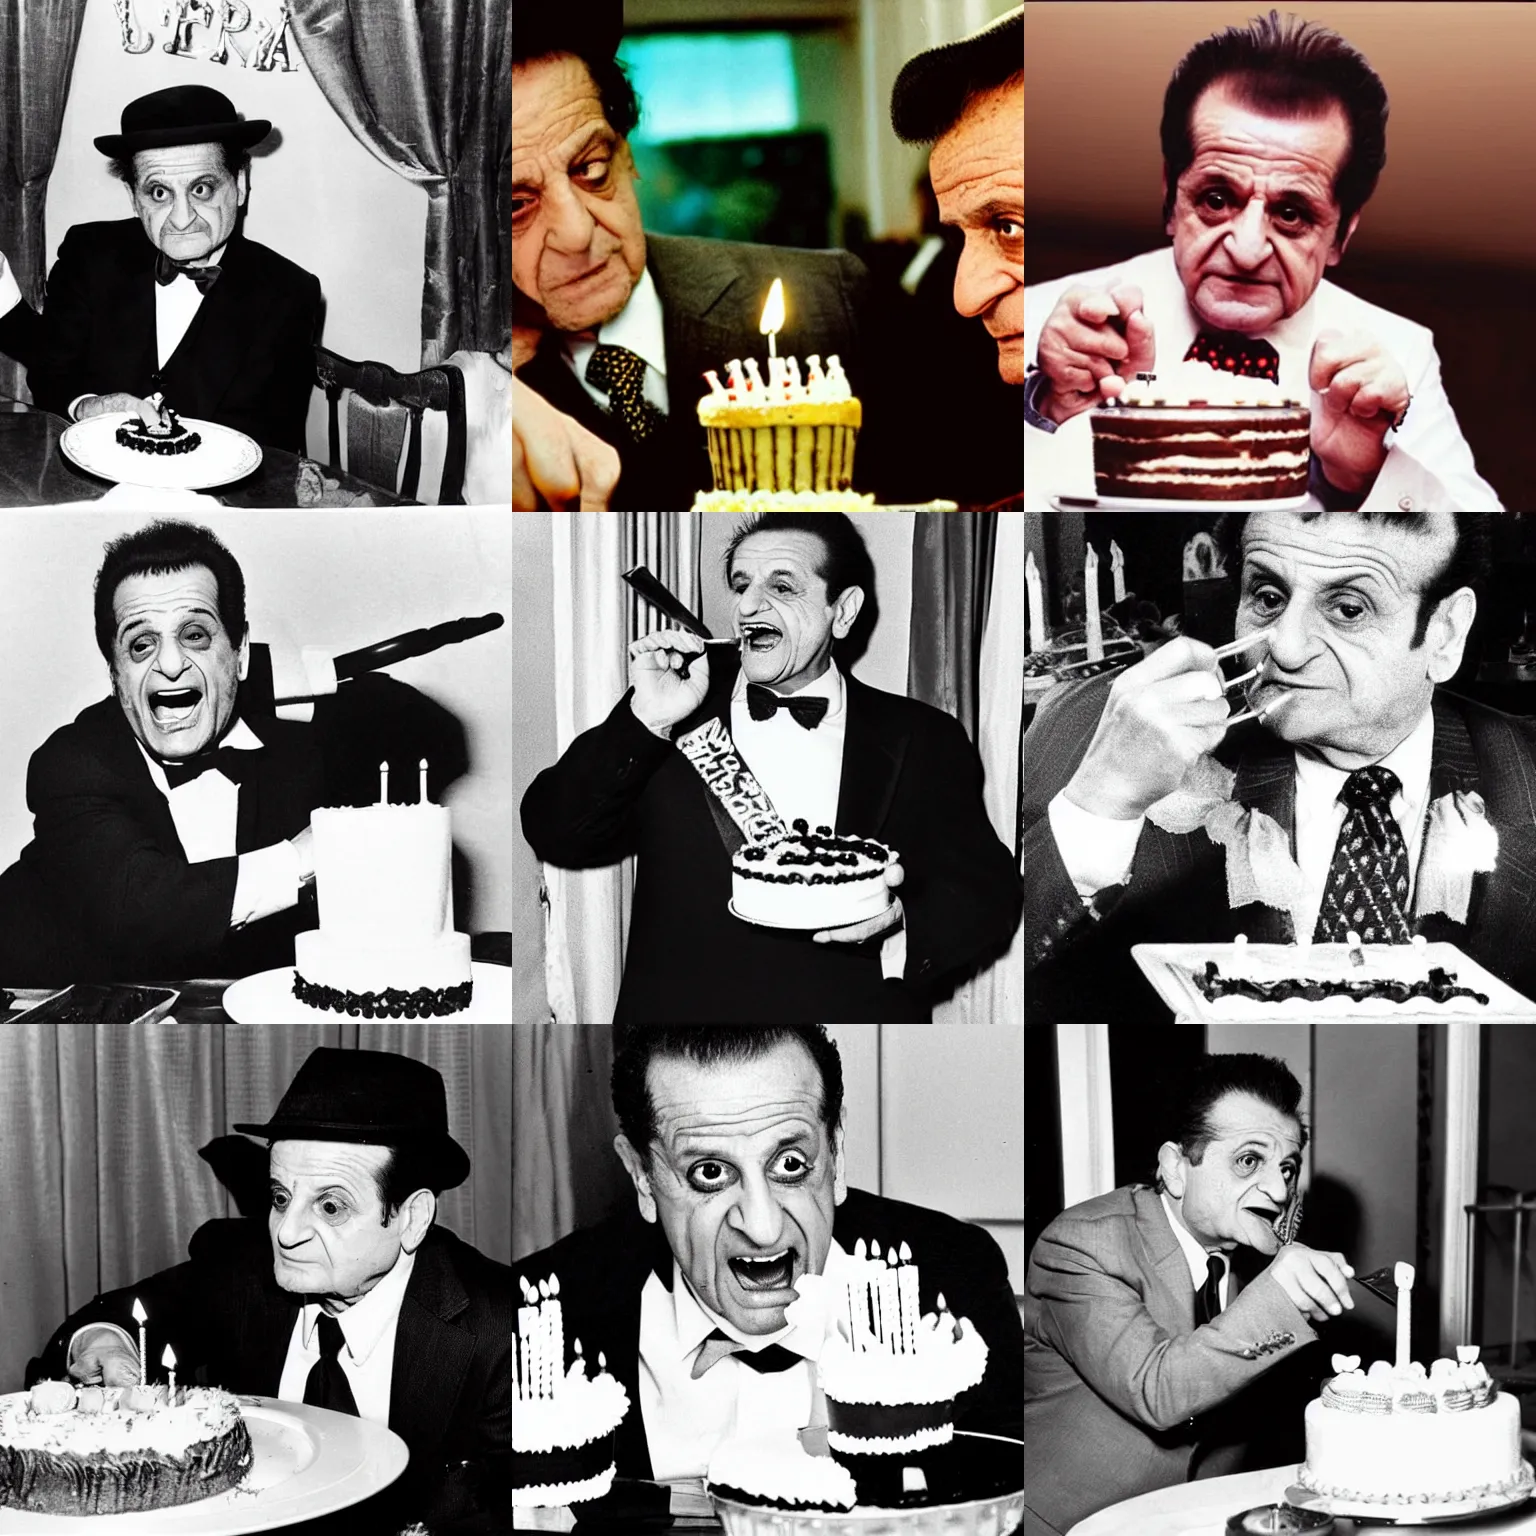 Prompt: a real photograph of Joe pesci dressed like a mobster, eating a birthday cake